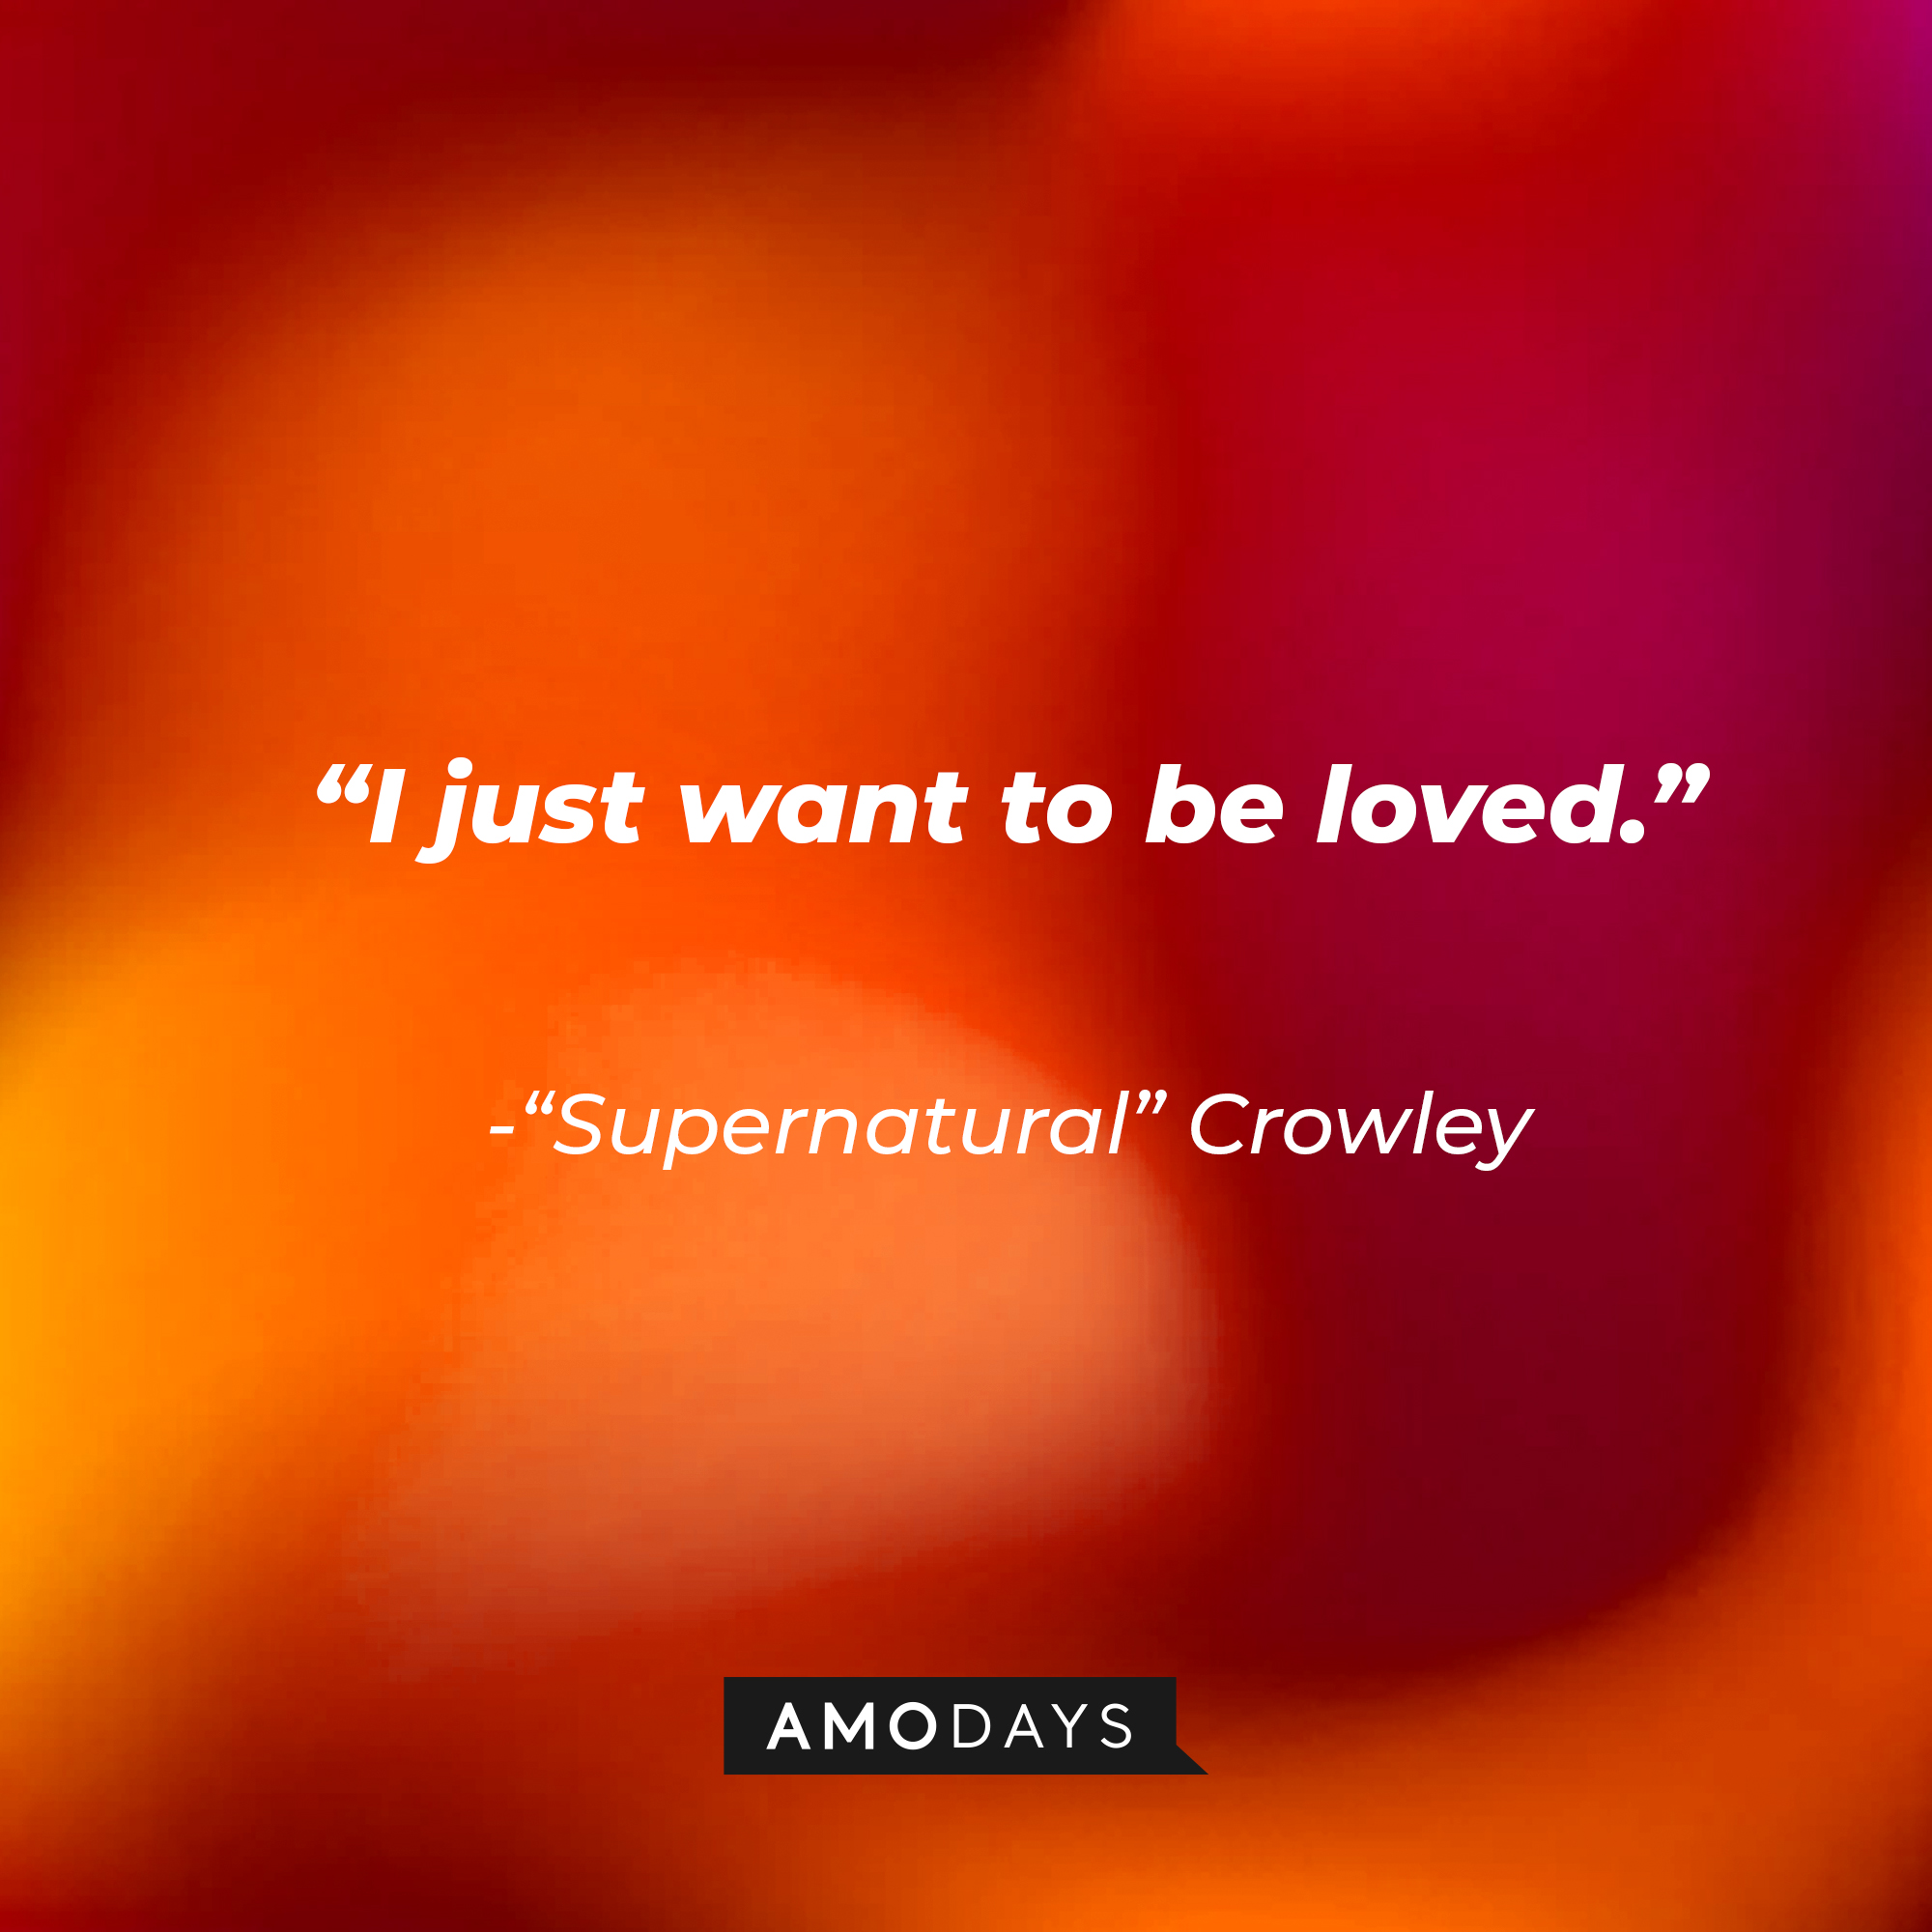 "Supernatural" Crowley's quote: "I just want to be loved." | Source: AmoDays